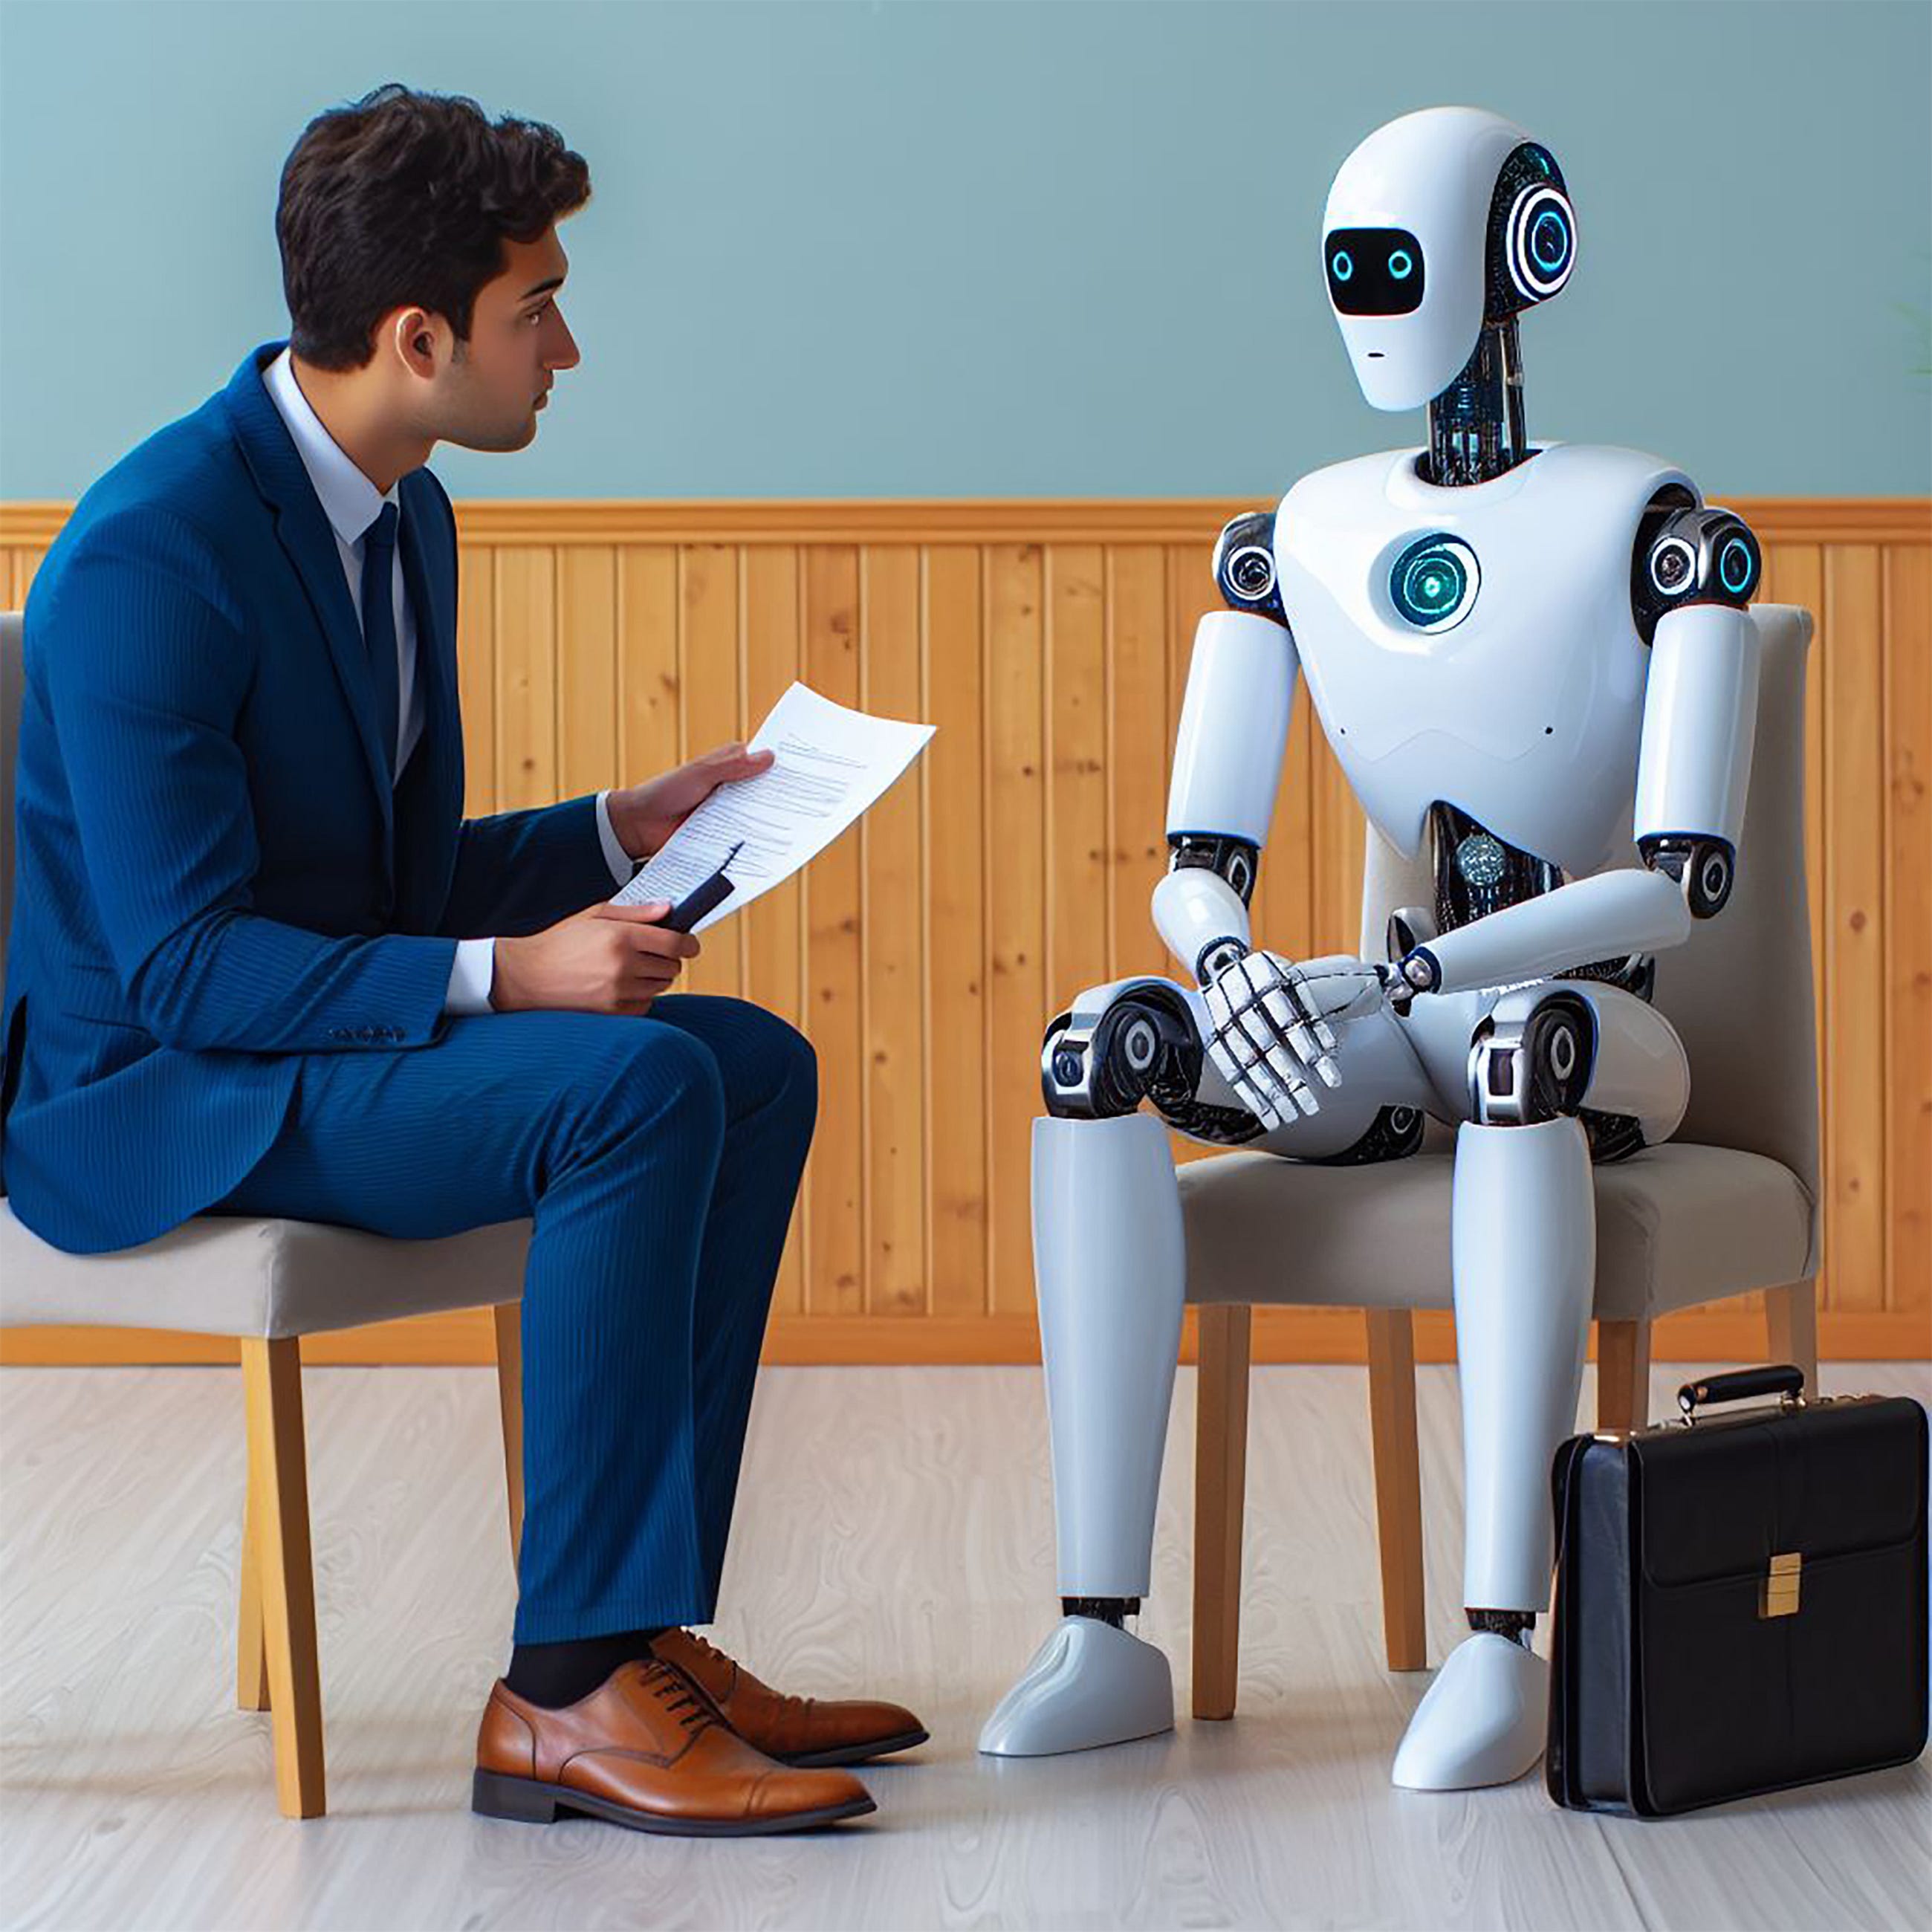 5 Must-Try AI Tools to Elevate Your Job Search